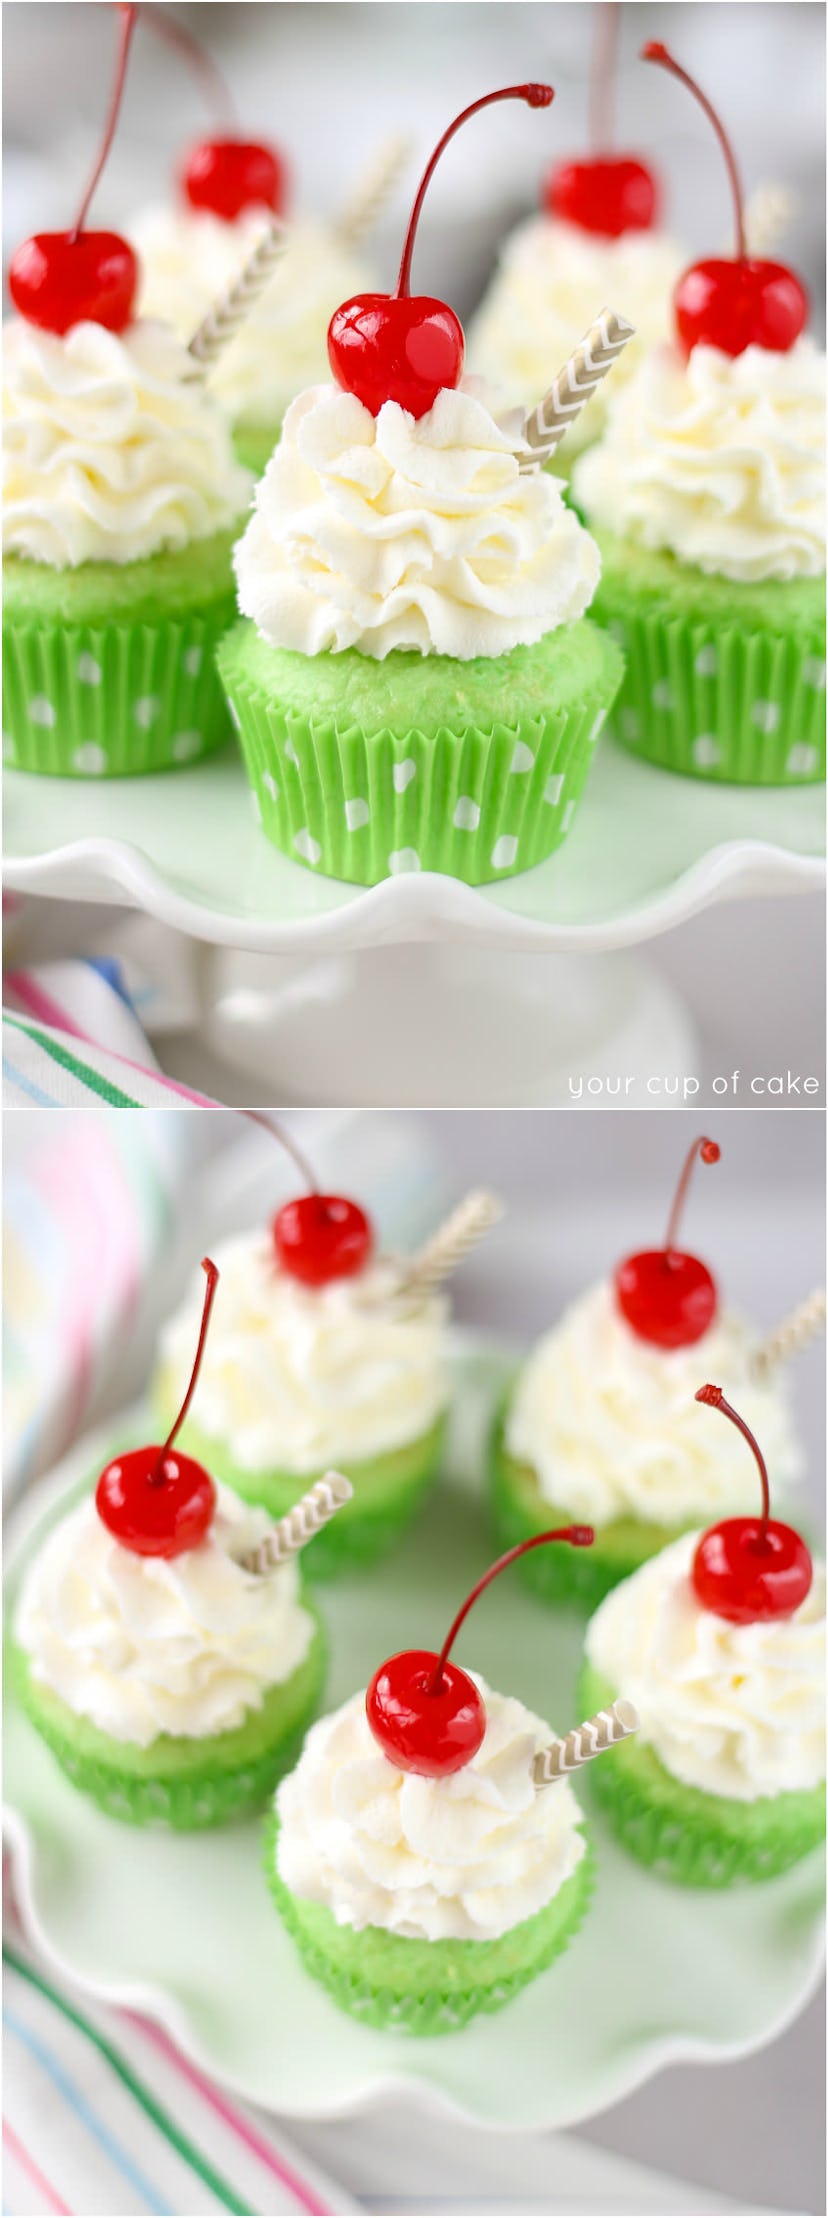 Shamrock shake cupcakes, which would make delicious green St. Patrick's Day treats.